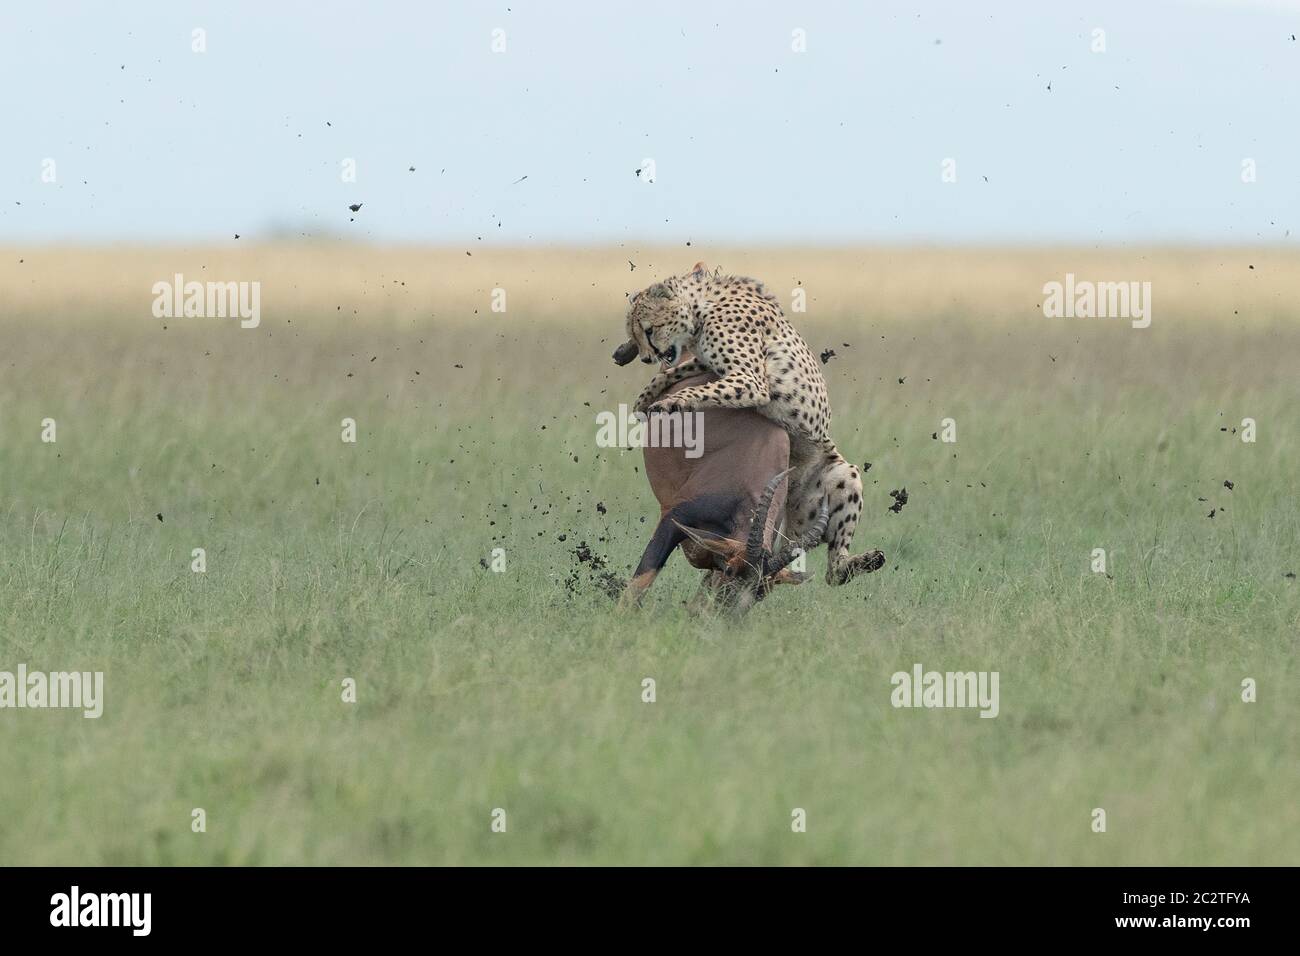 KENYA: The topi is brought stumbling down. AMAZING photos show a cheetah RIDING ON TOP of a galloping antelope in a frantic race for life. Remarkable Stock Photo